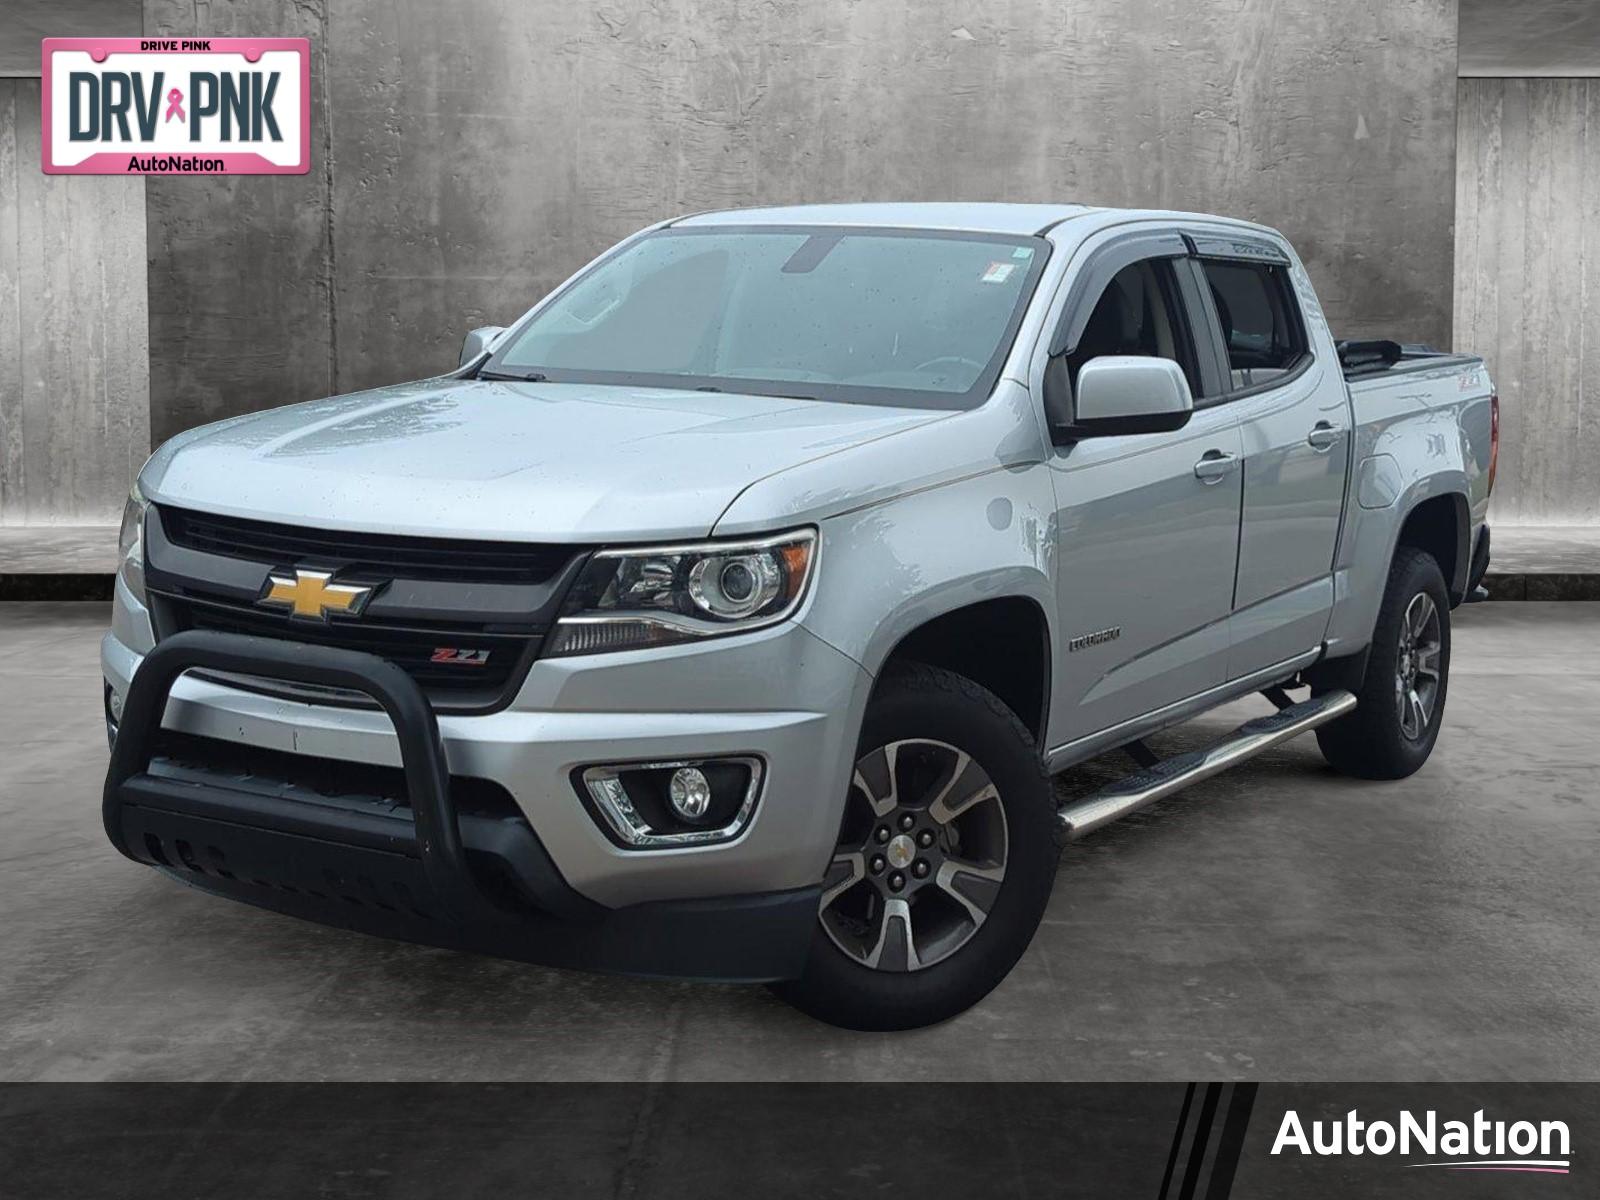 2016 Chevrolet Colorado Vehicle Photo in Clearwater, FL 33765